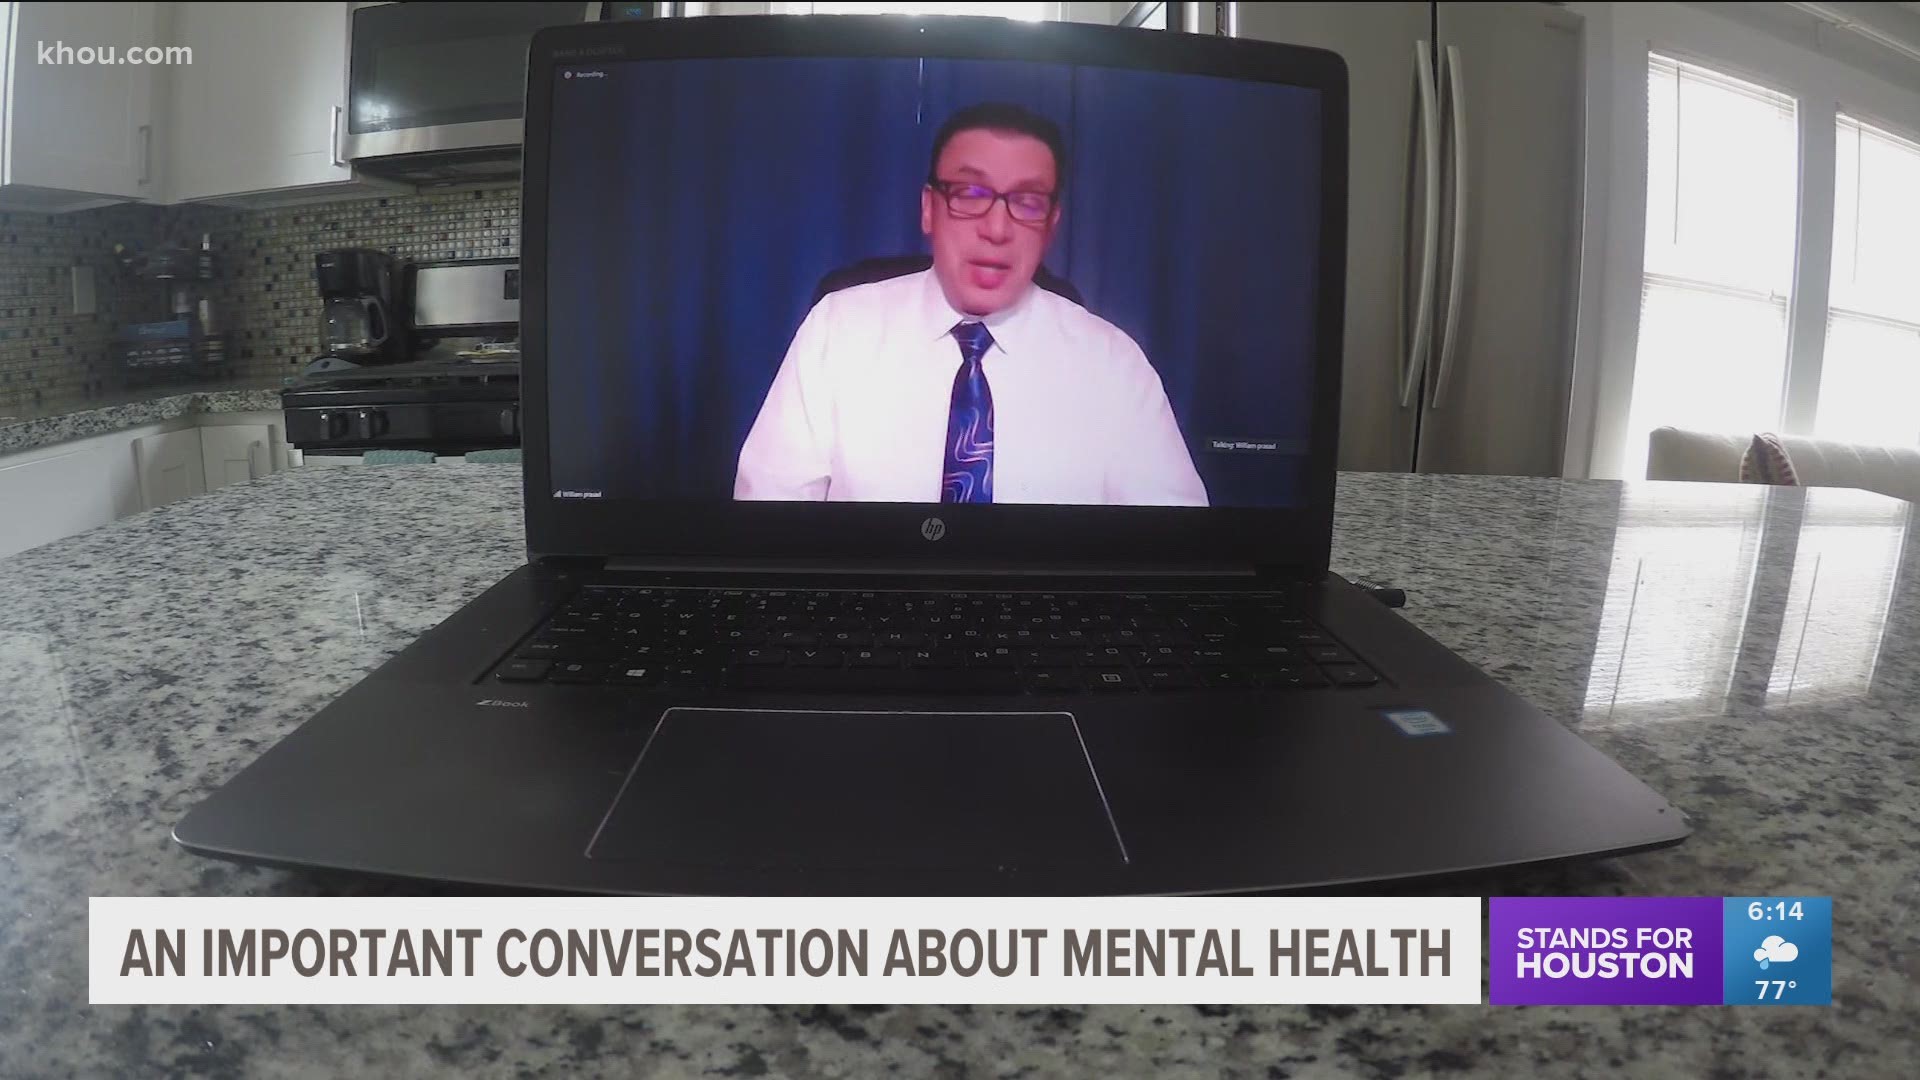 Talking saves lives. On World Suicide Prevention Day, KHOU 11's mental health expert offers insight and advice to end stigmas and start a conversation.